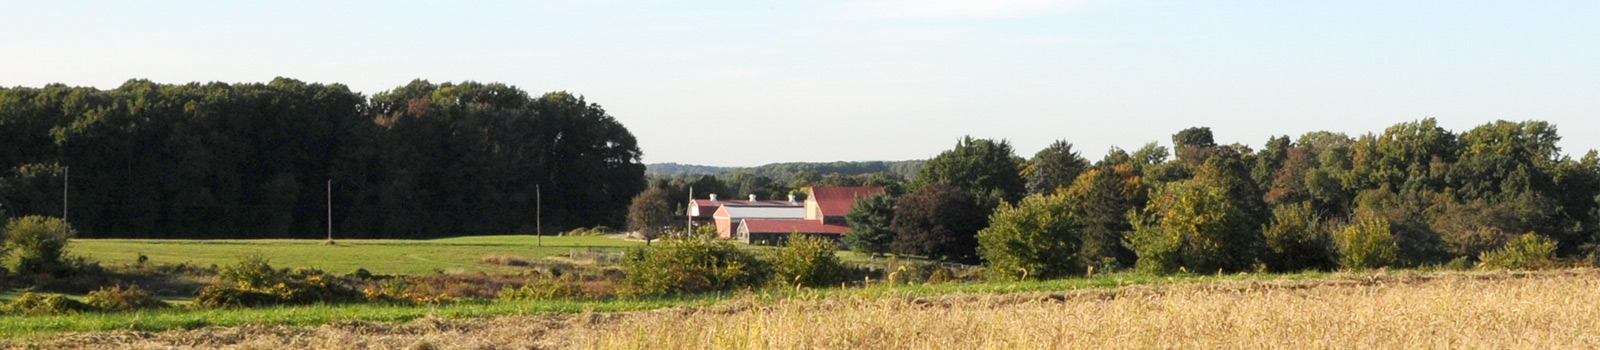 Brightside Farm, part of the Charlestown Township Parks System